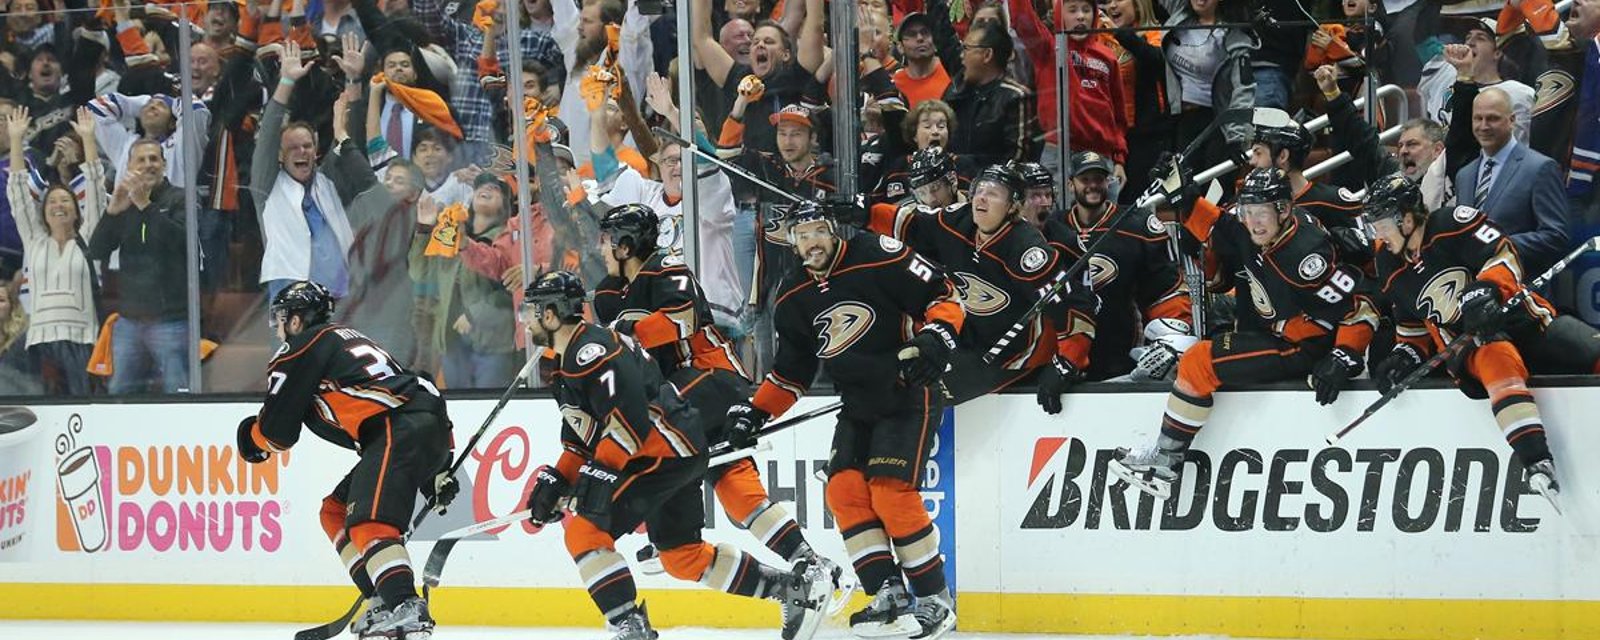 Breaking : Ducks lose major offensive piece for game 5. 